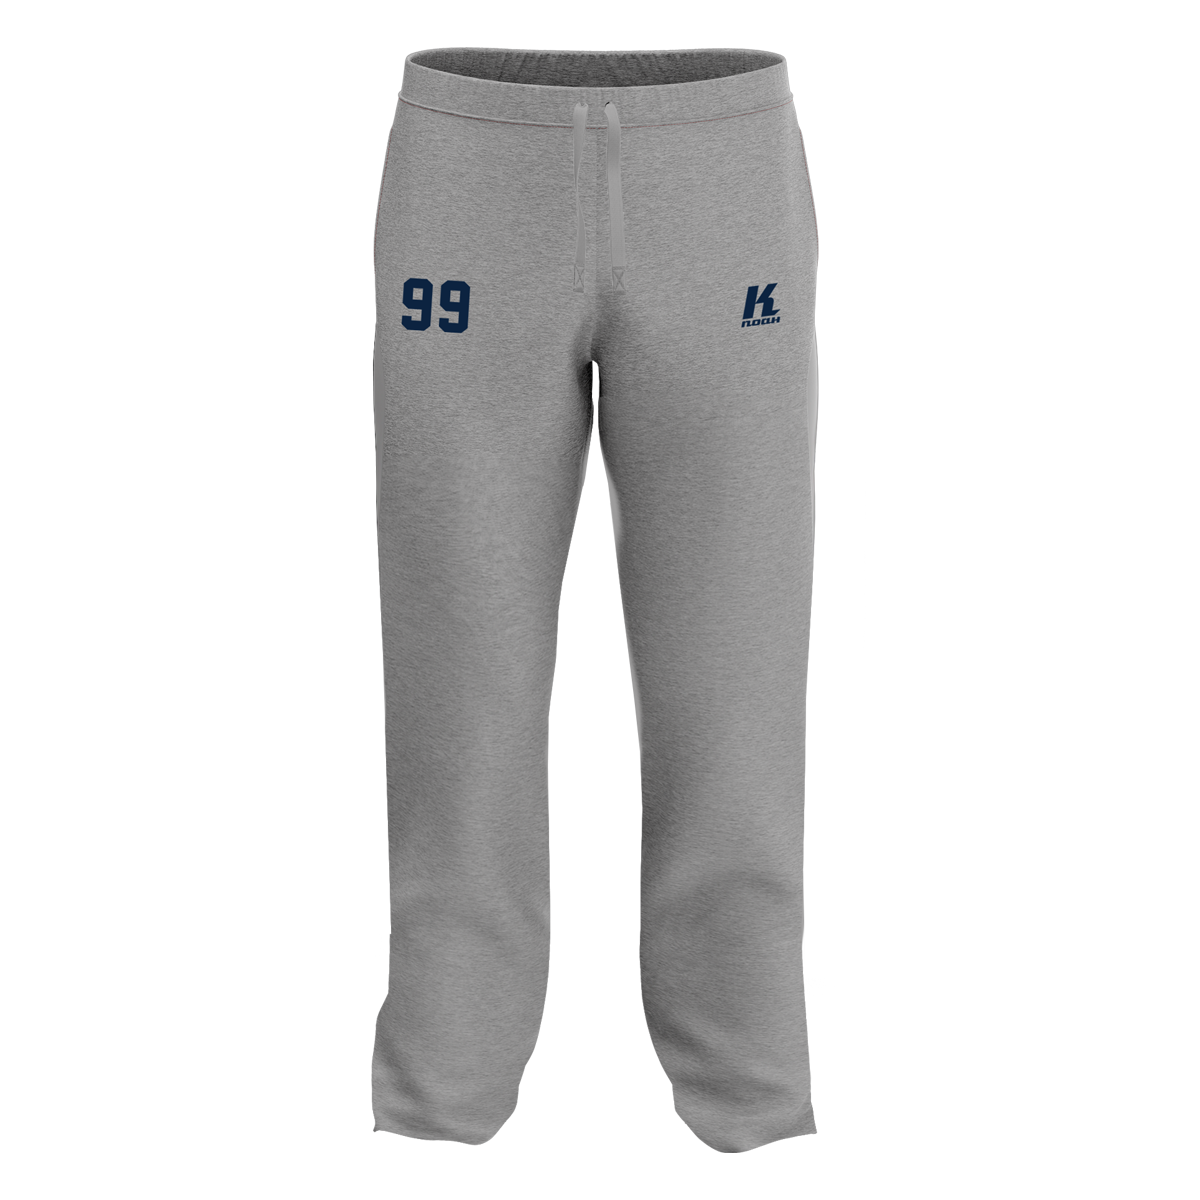 Rams Basic Sweatpant Grey ST799 with Playernumber/Initials